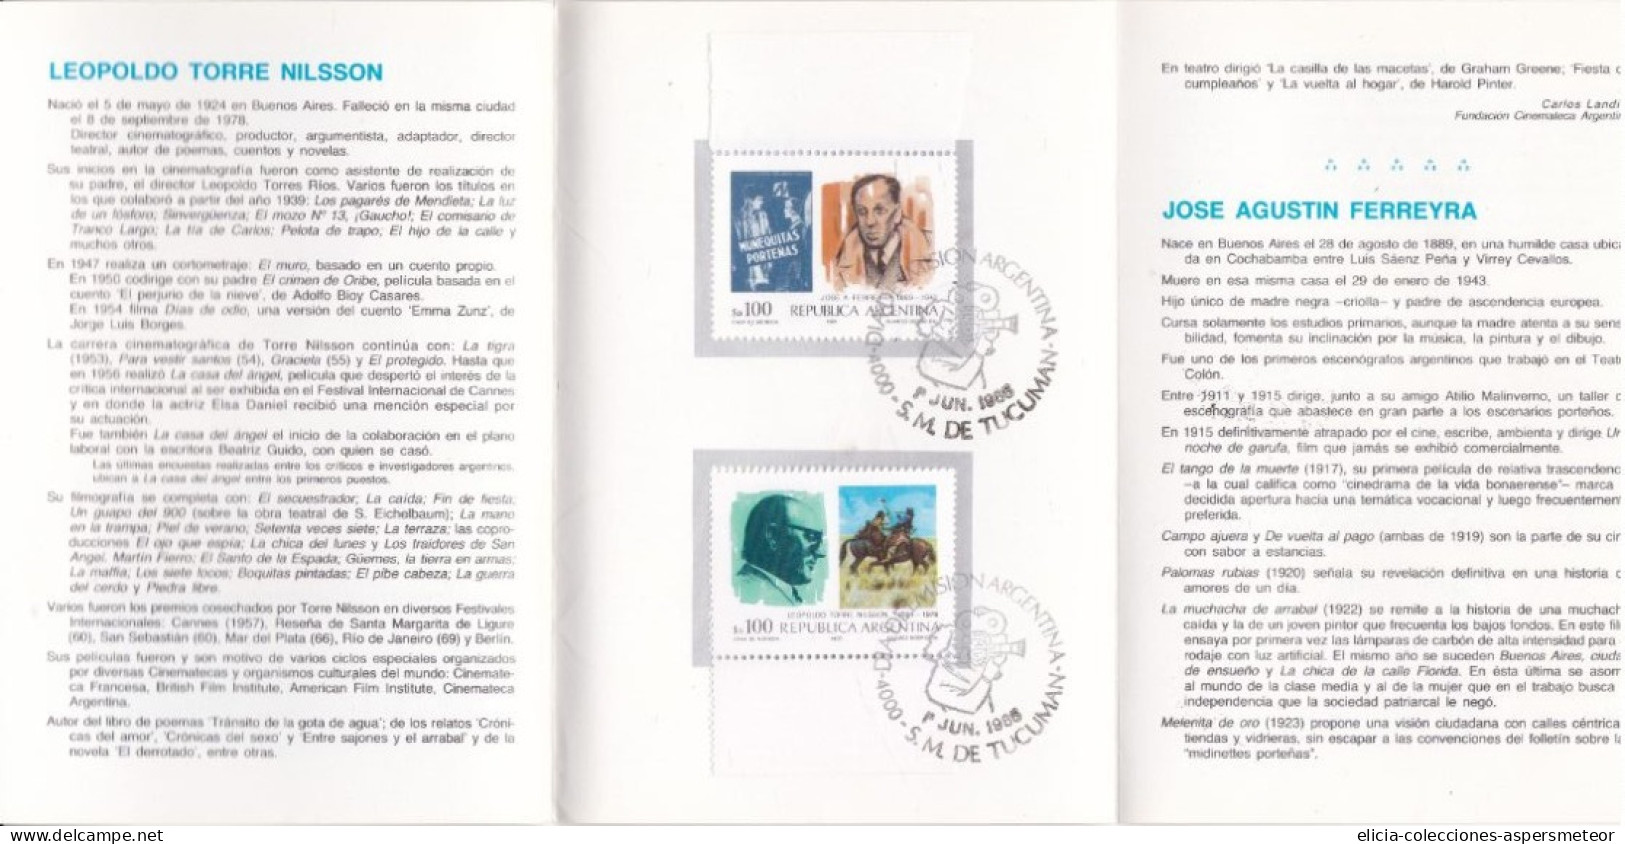 Argentina - 1985 - Booklet - Collection Of Argentine Postage Stamps ENCOTEL - Philatelique Service - Caja 30 - Cuadernillos